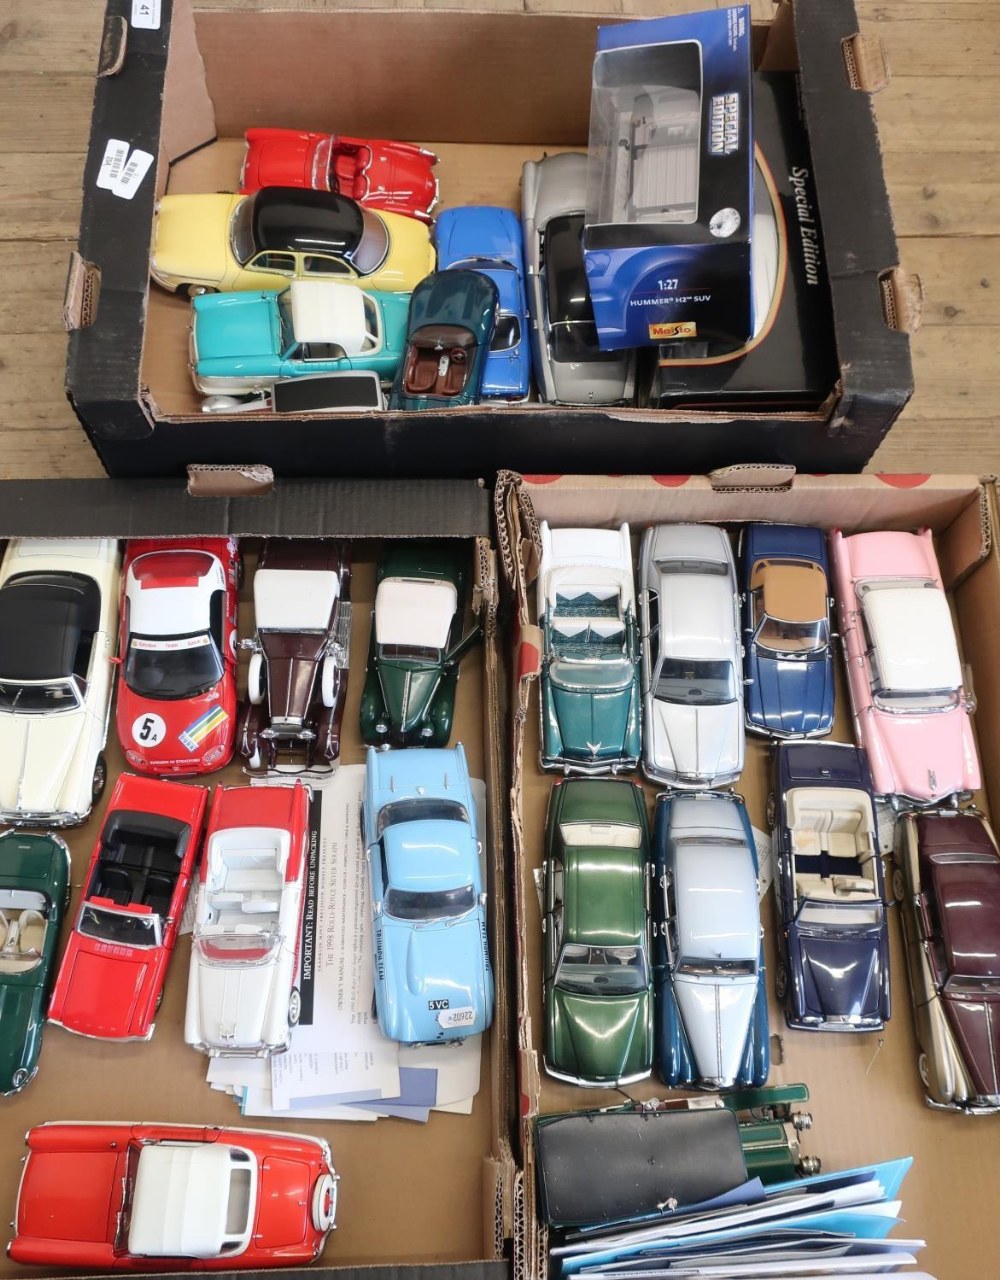 Maitso Porsche Cayenne and Hummer boxed models, and a collection of unboxed Corgi, Lledo, Franklin